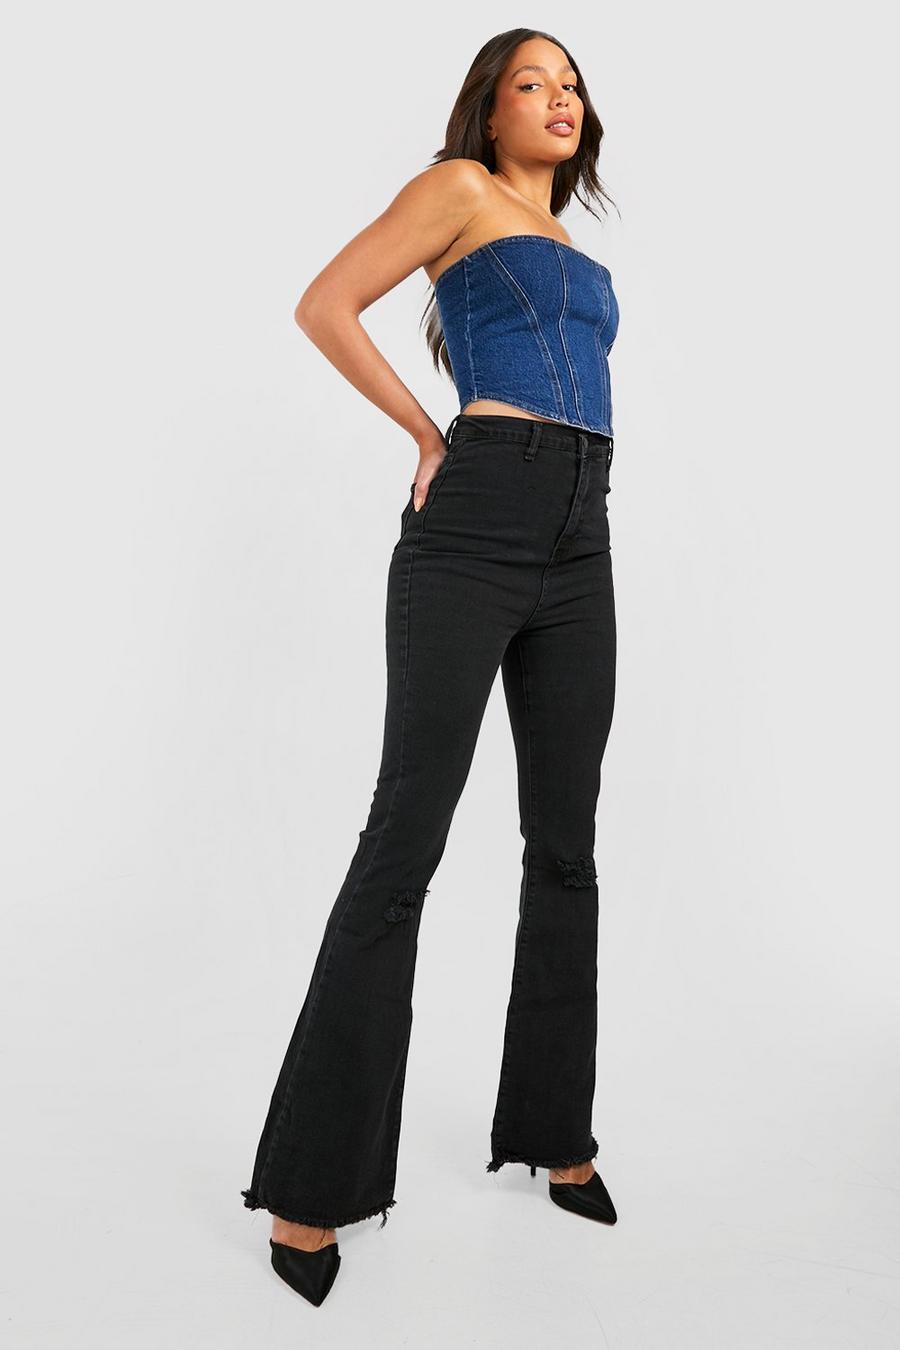 Black Tall High Waist Ripped Stretch out Jeans